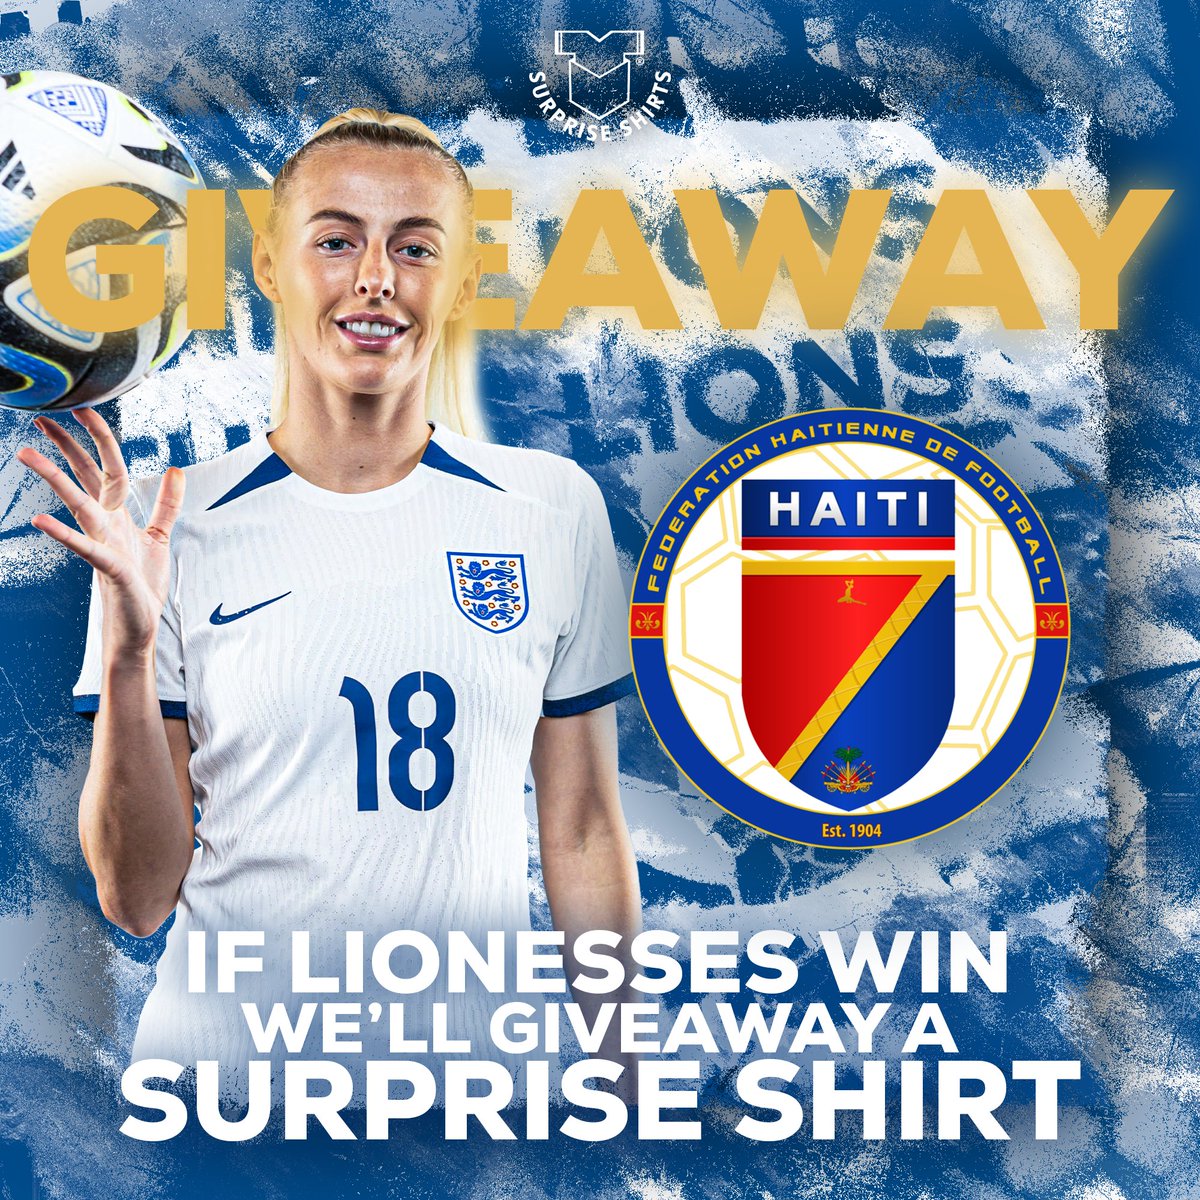 It's time for a GIVEAWAY! 😍 If the Lionesses beat Haiti tomorrow, we'll give away a surpriseshirts.co.uk mystery shirt! 🇭🇹👕 ♻️ Retweet ✅ Follow @SurpriseShirts That's it! Good luck 🏴󠁧󠁢󠁥󠁮󠁧󠁿 #LionessesDownUnder #Lionesses #FIFAWWC #BeyondGreatness